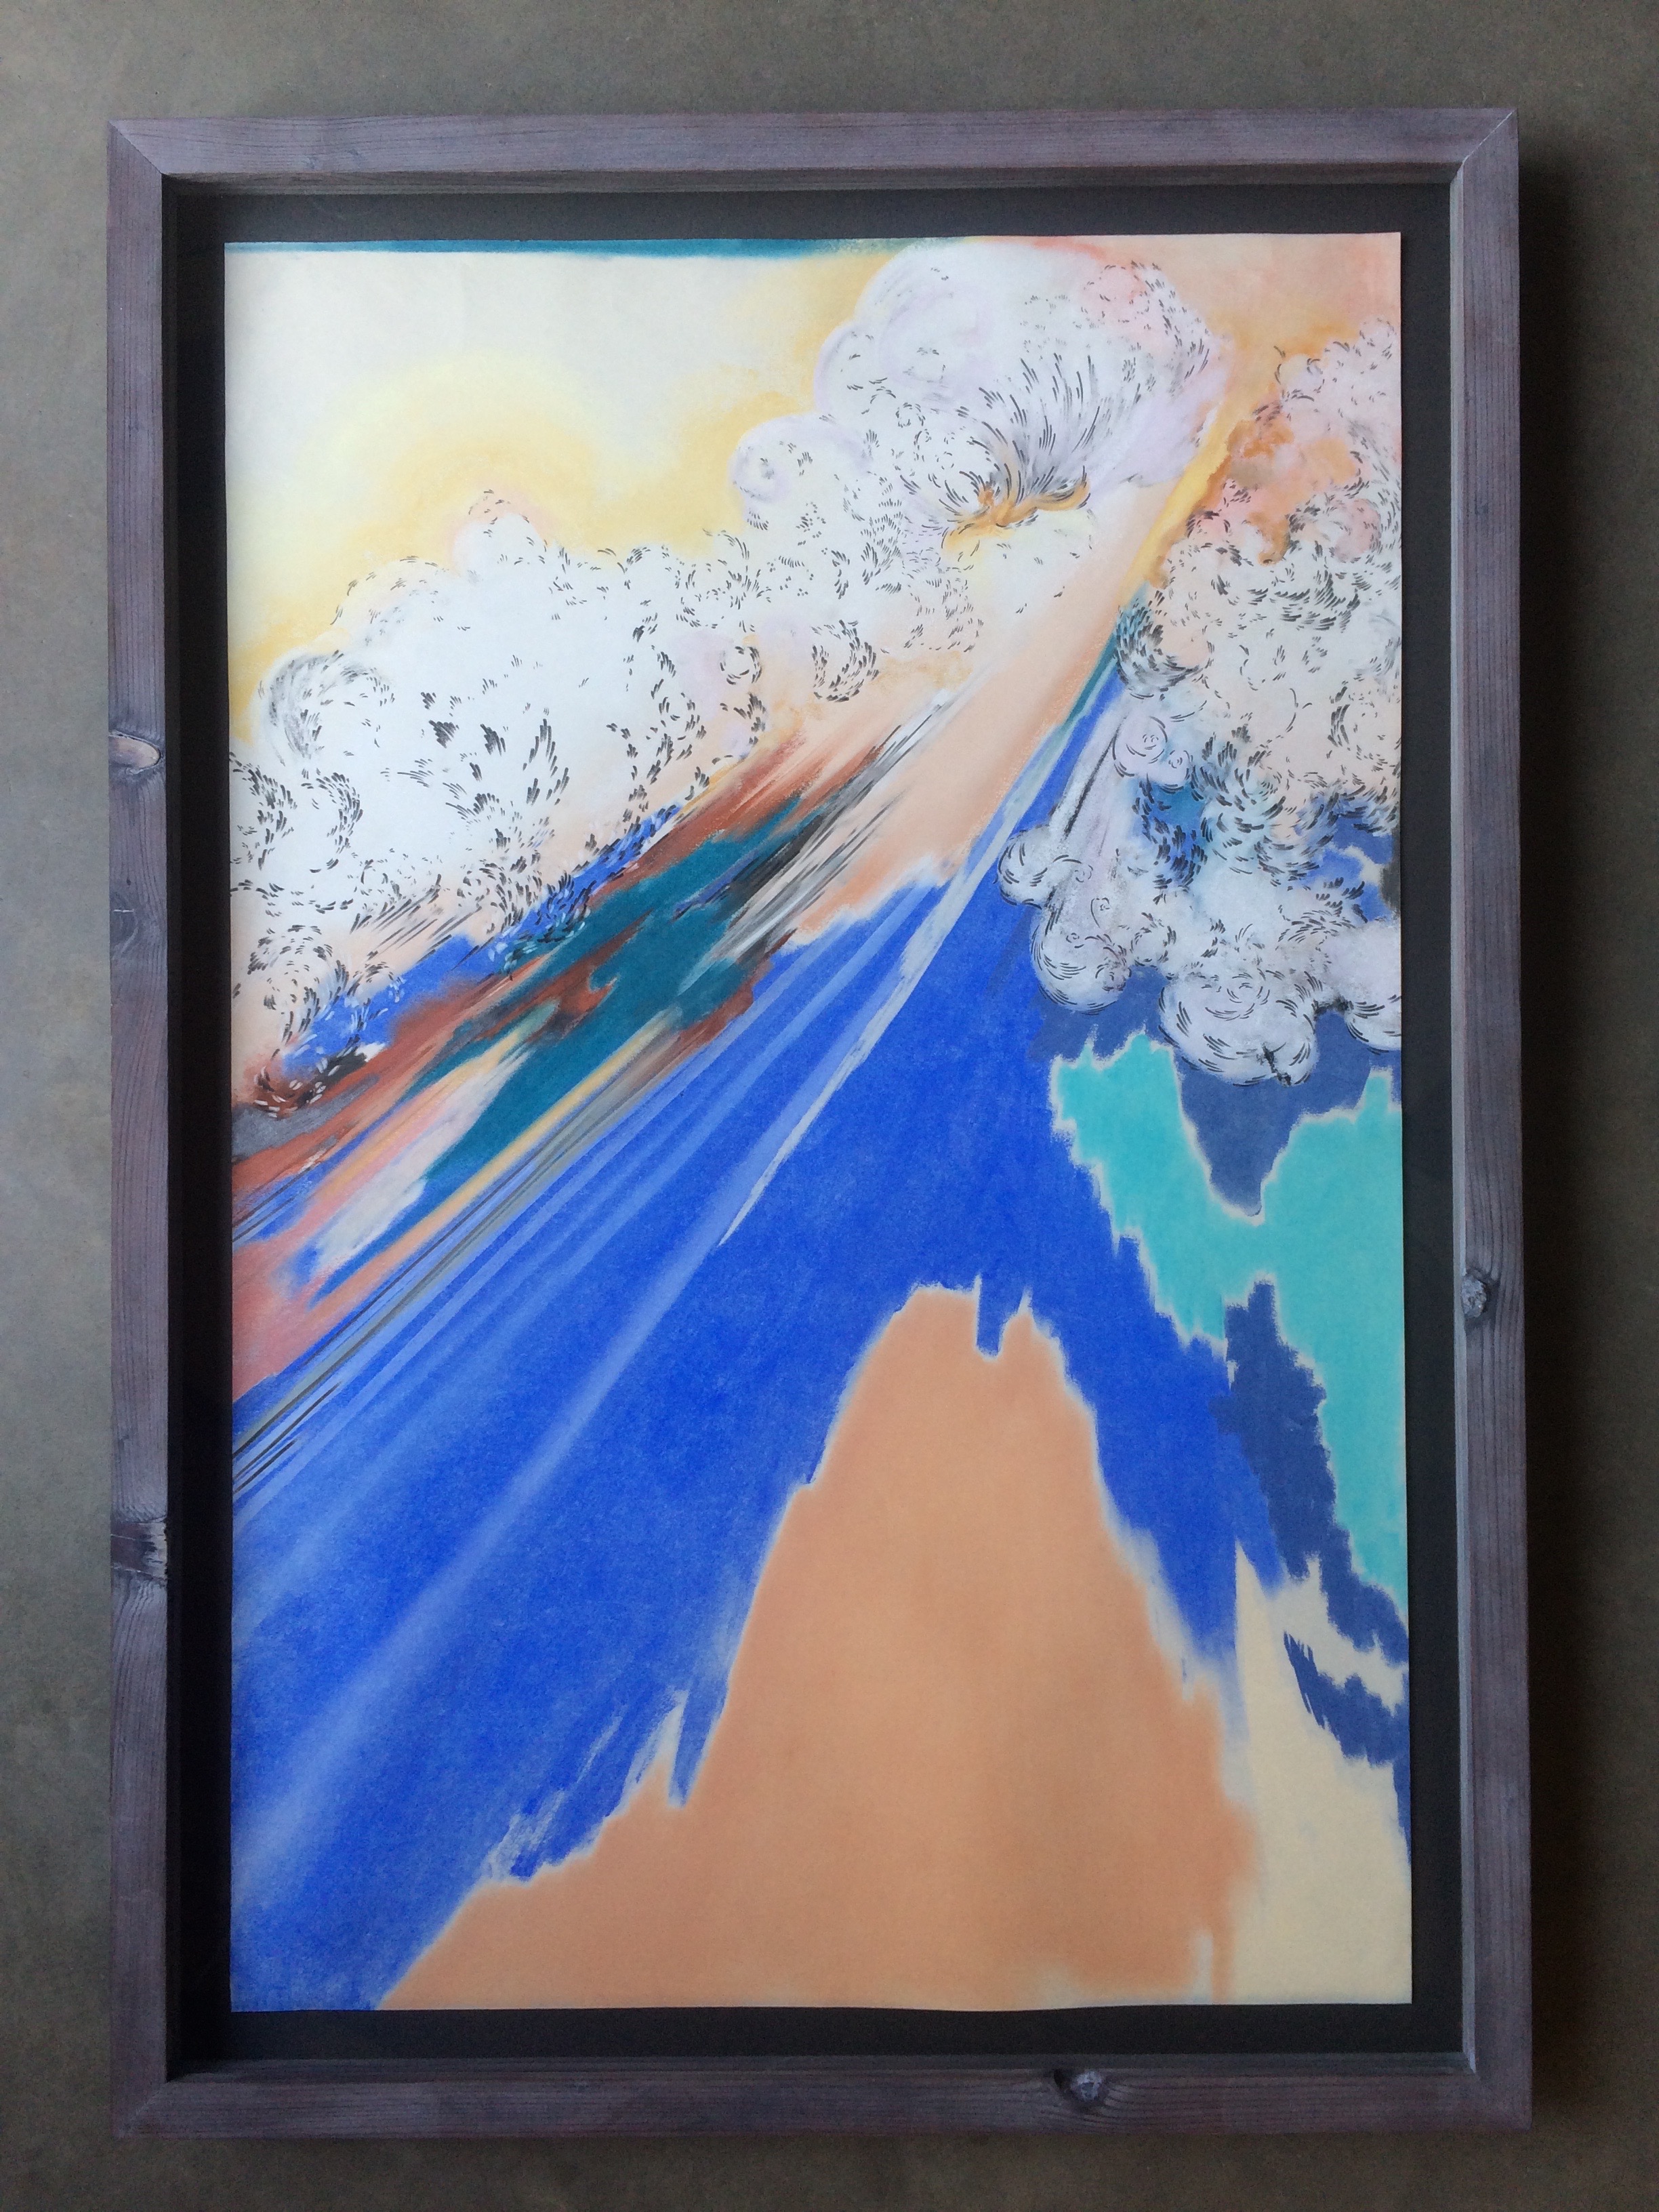  chalk and pencil on paper  ( 24 x 36 inches unframed)  hand built lime-washed redwood frame  SOLD 